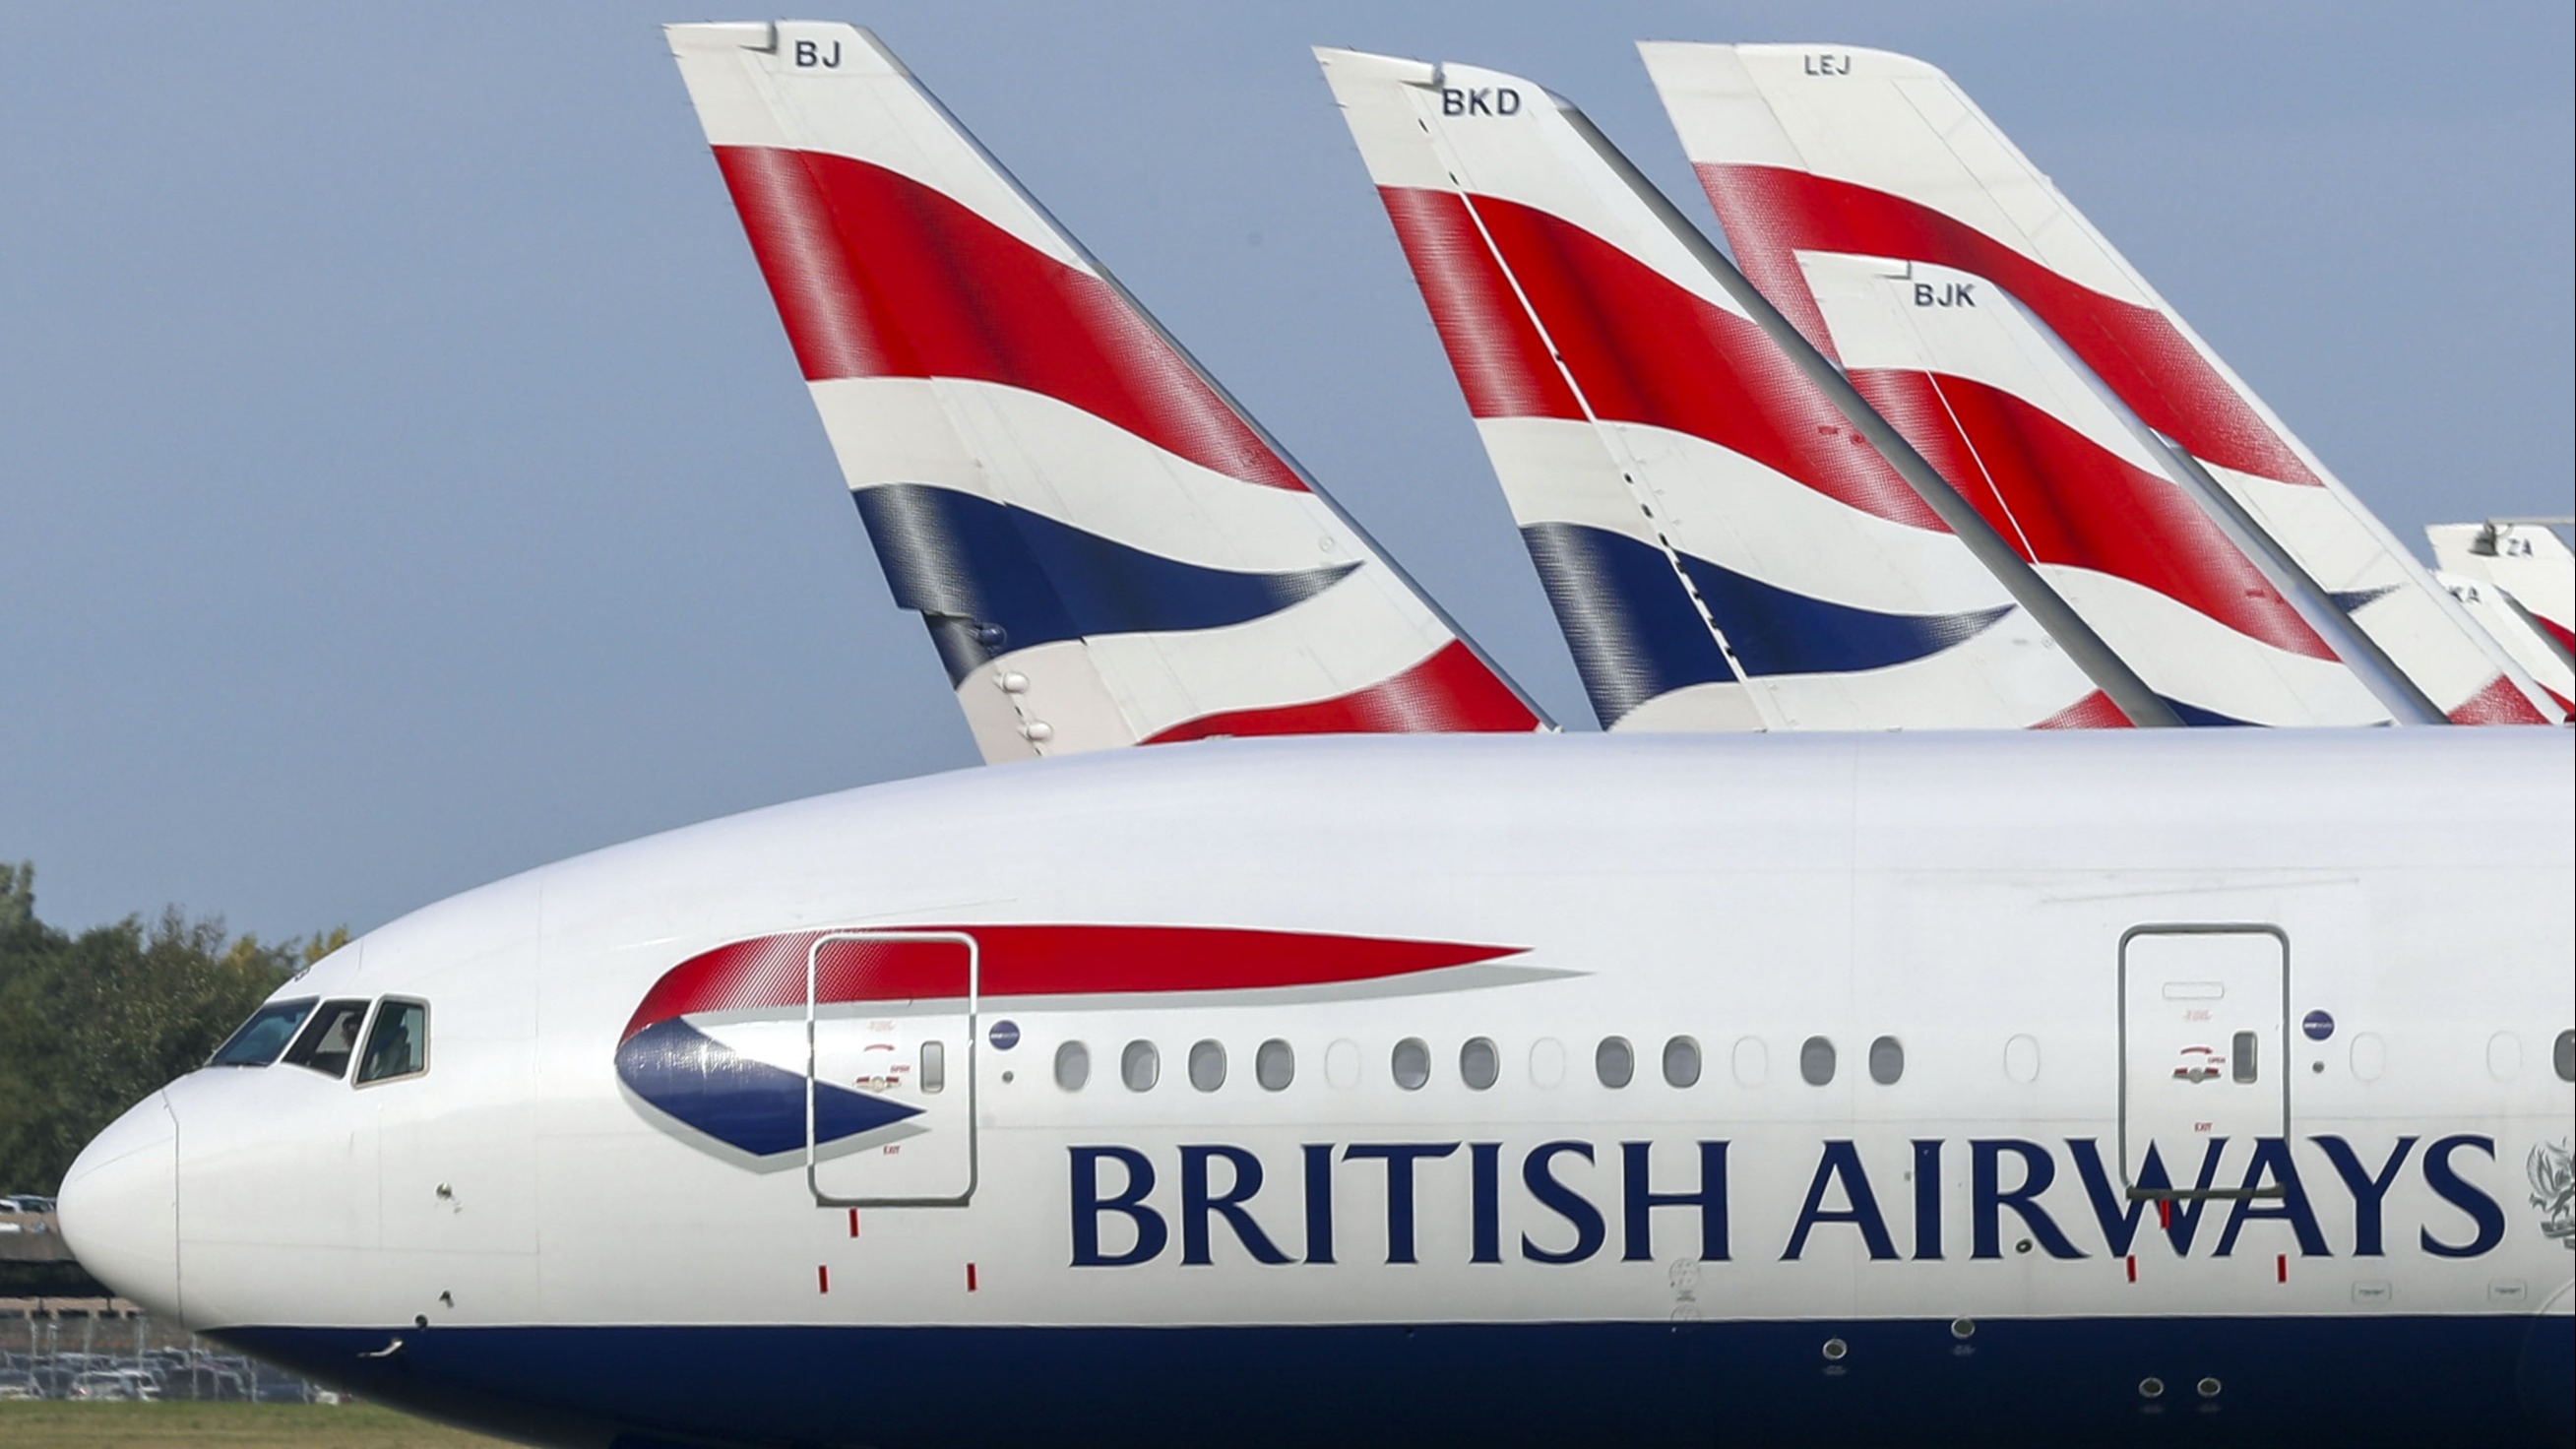 Bank holiday technical issue is latest glitch to hit UK air traffic system